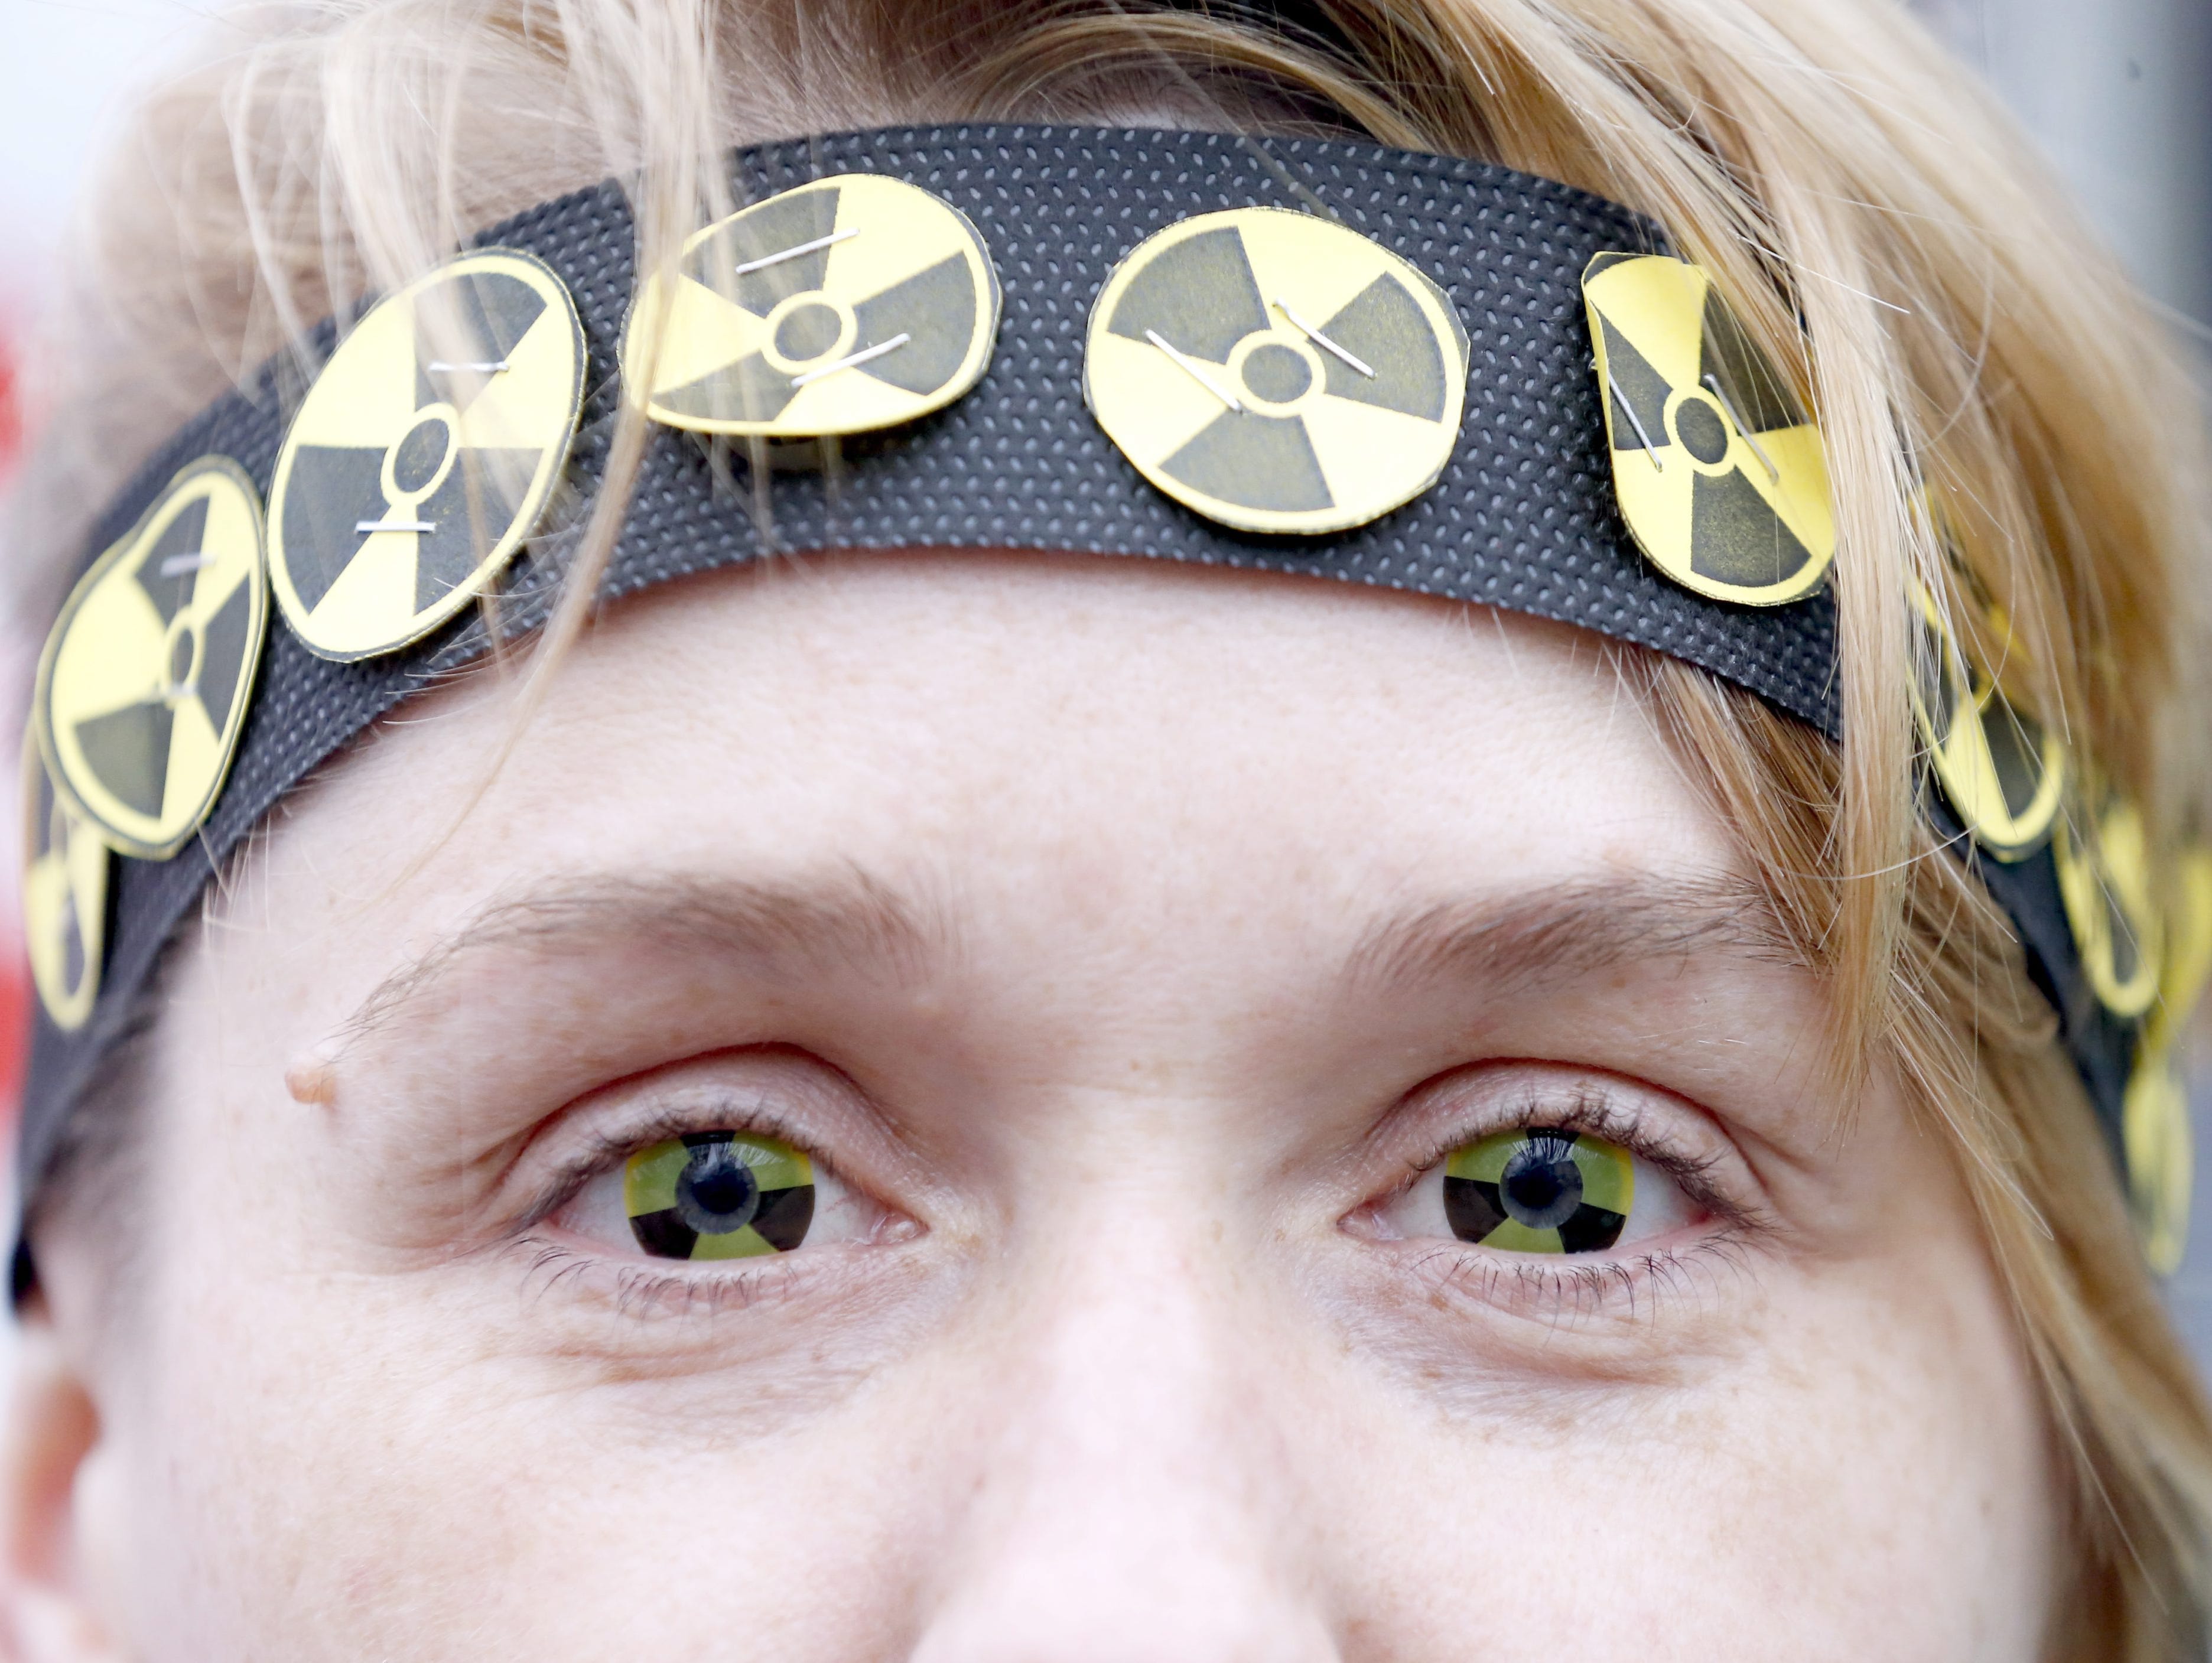 A protester wears eye-lenses with radioactive signs, as she participates in a rally to mark the 30th anniversary of the Chernobyl nuclear disaster in Minsk, Belarus on April 26, 2016.